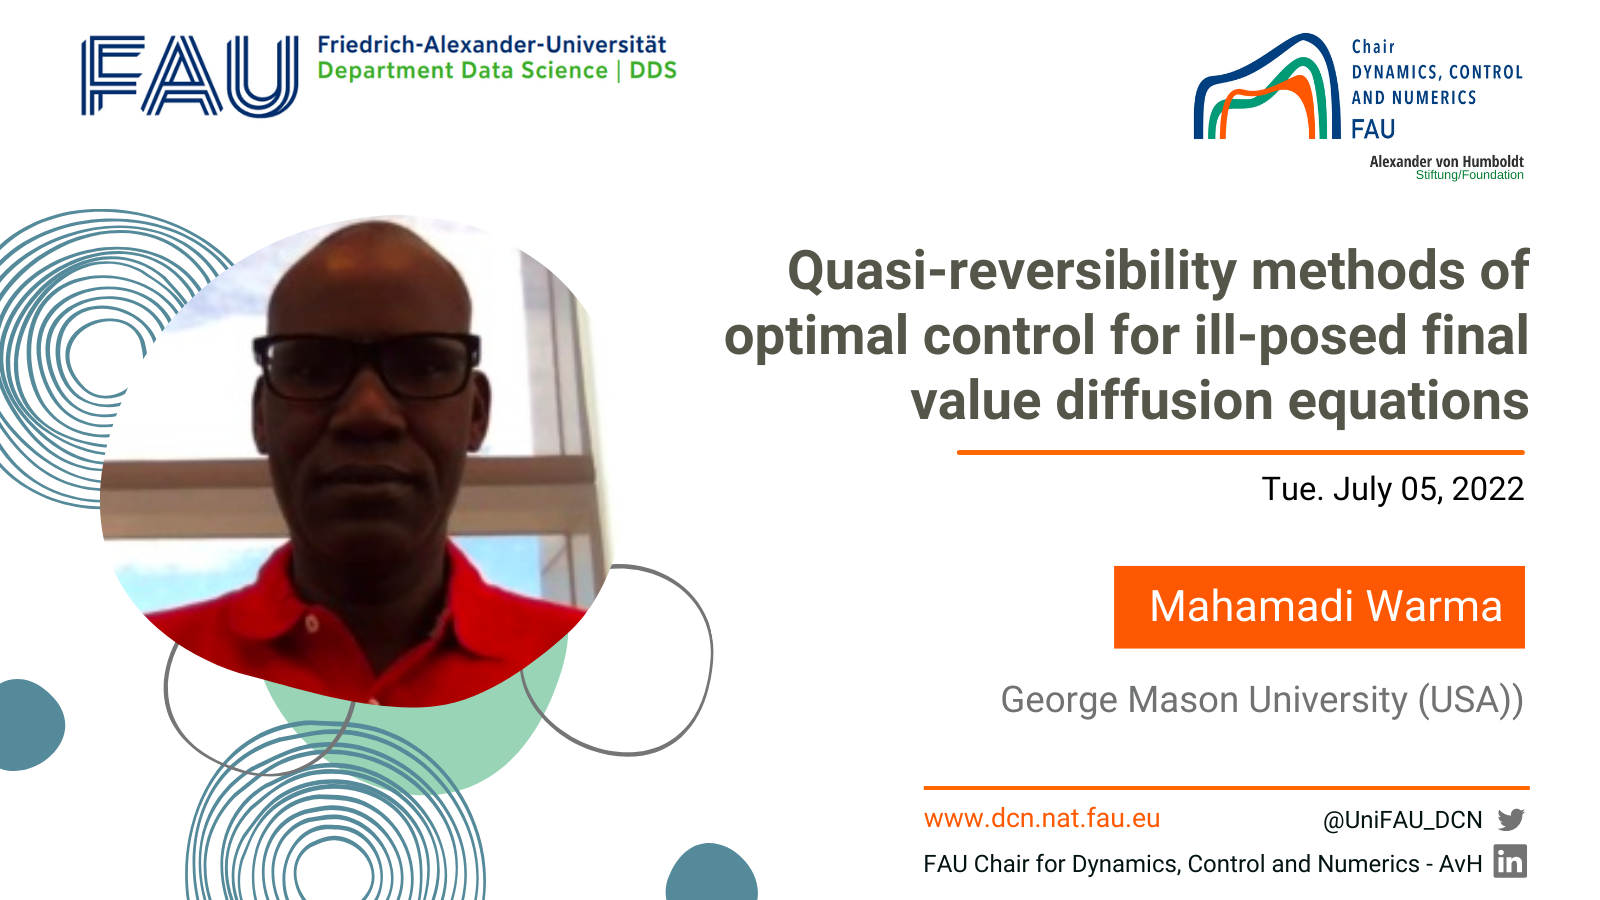 Quasi-reversibility methods of optimal control for ill-posed final value diffusion equations